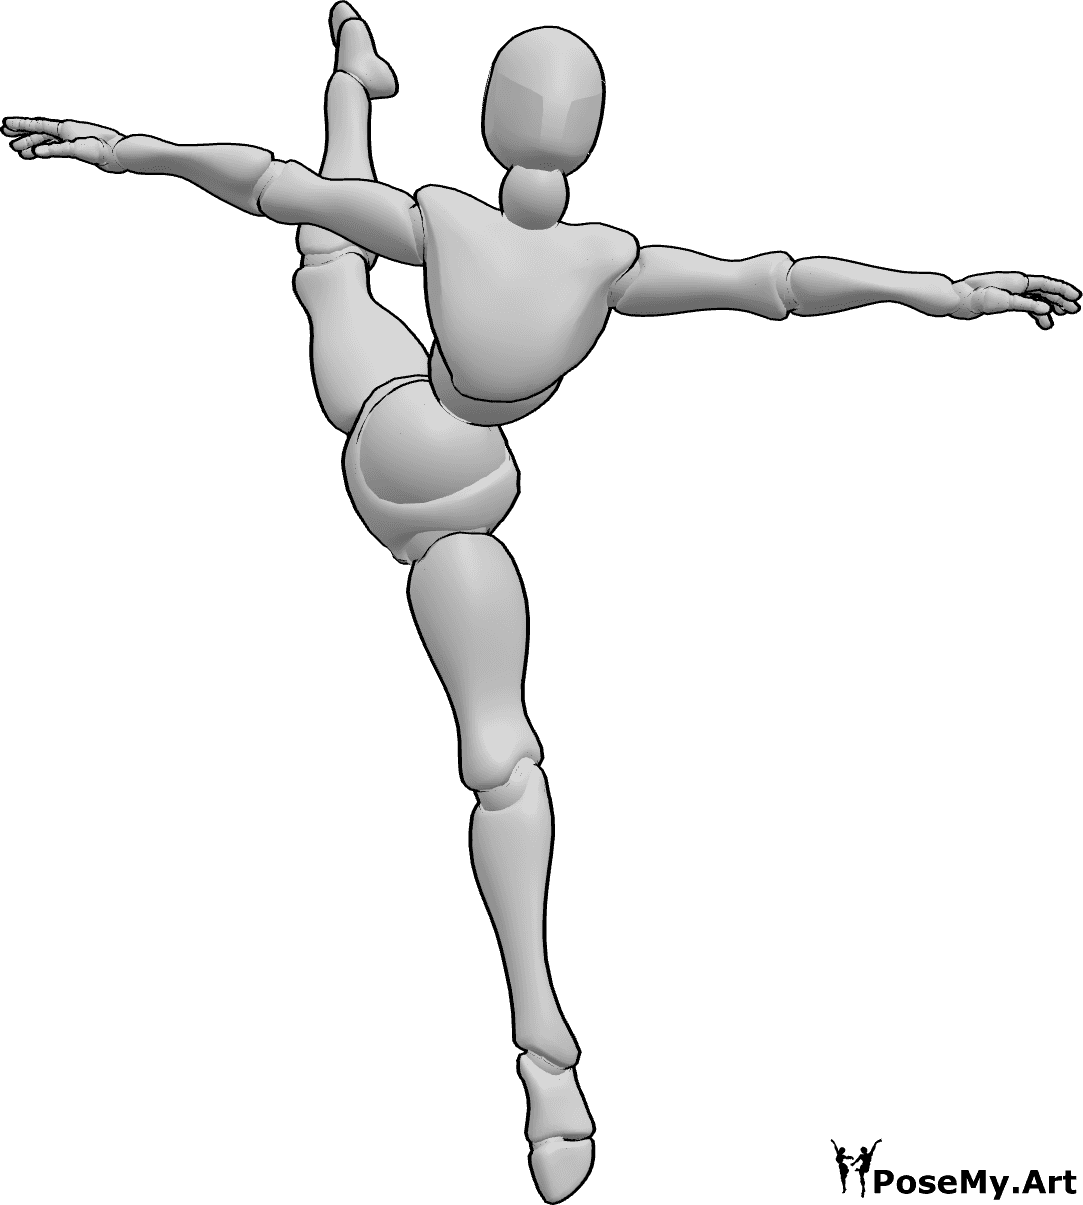 Pose Reference- Side split jumping pose - Female is dancing, jumping high while doing a side split in the air